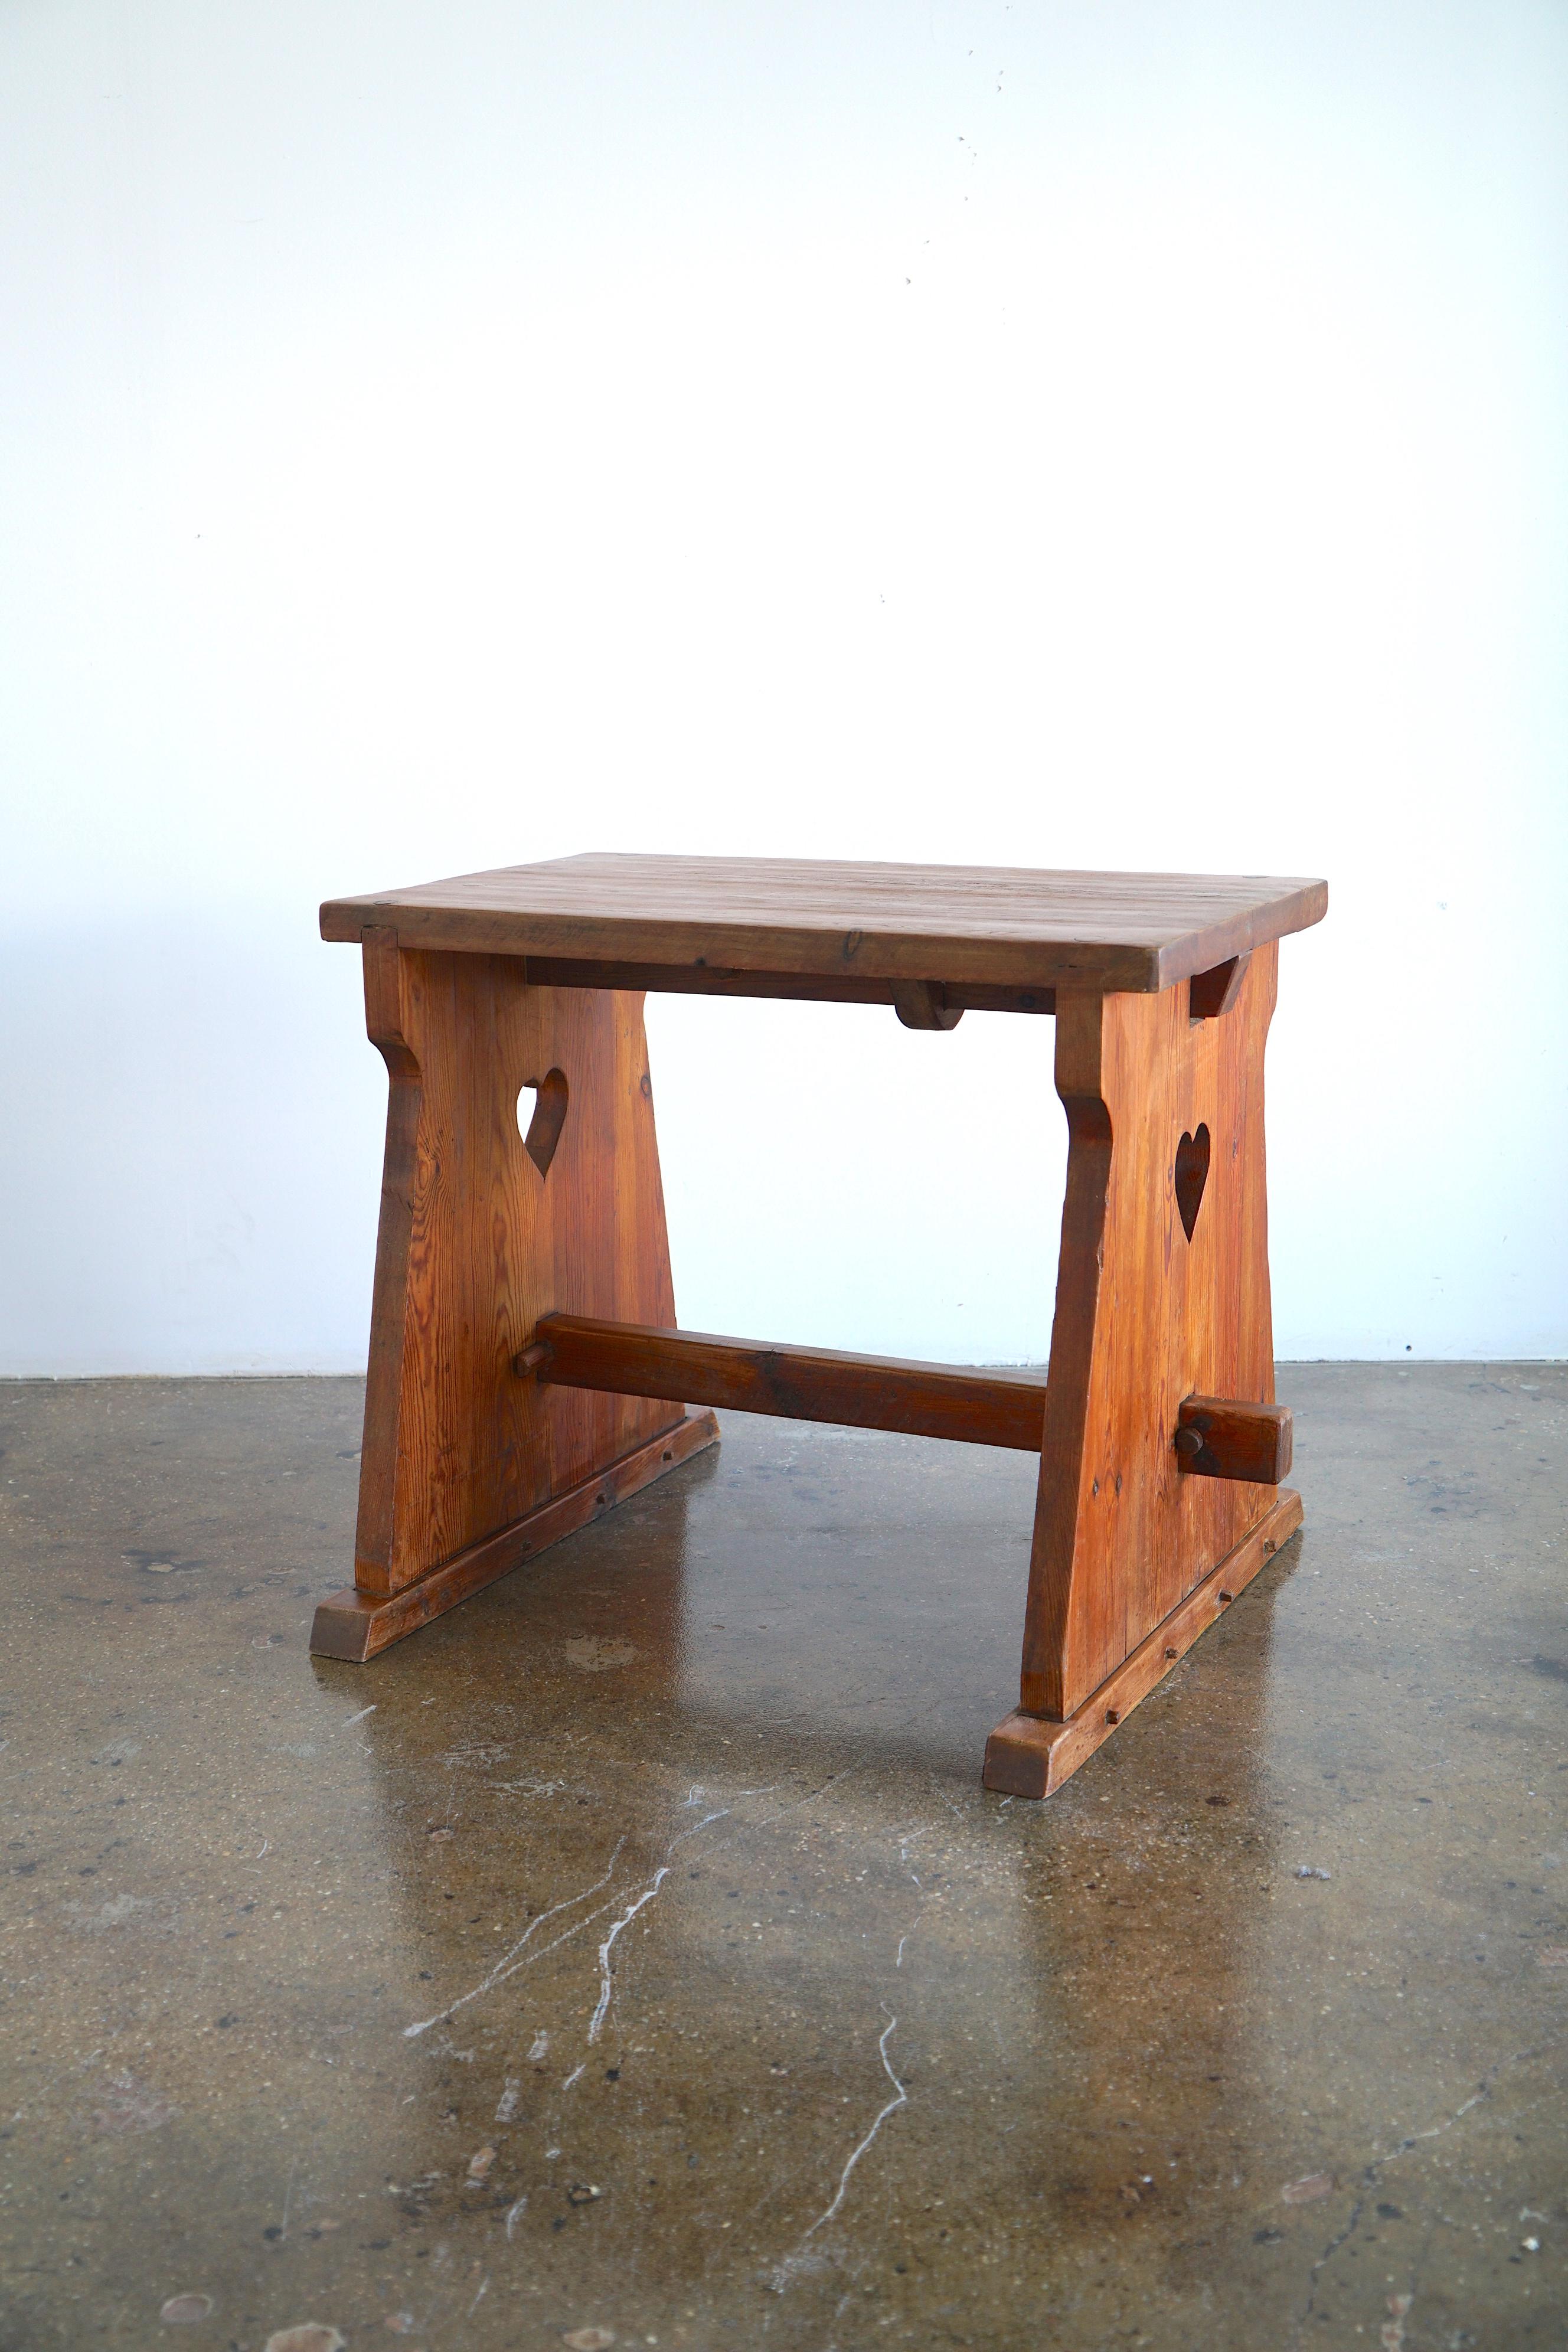 Sport cabin series Swedish pine table in style of Axel Einar Hjorth.
Stained pine, Circa 1930th-40th.
Table top is 34